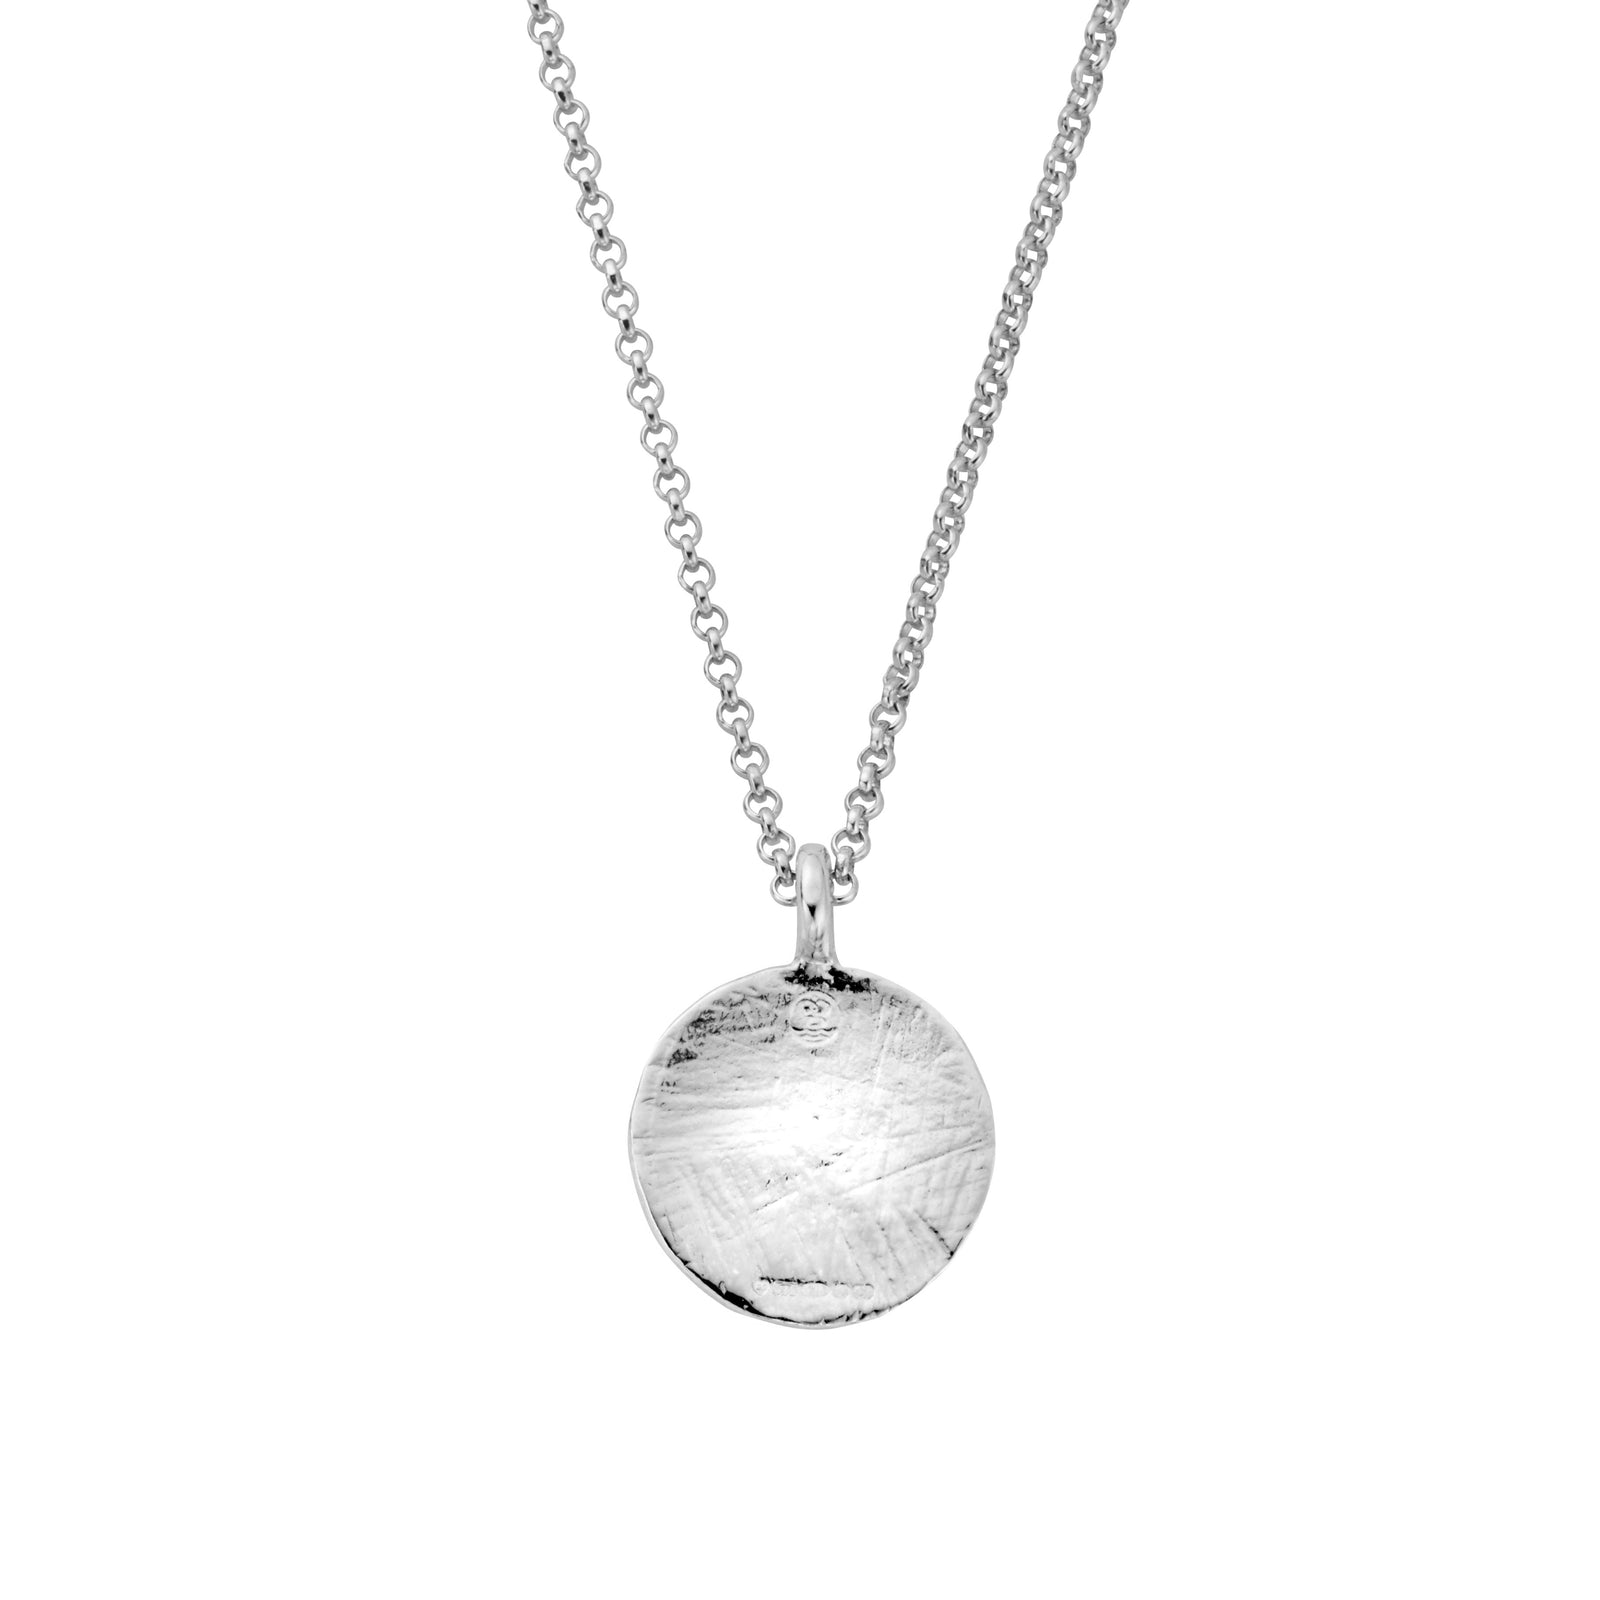 Silver Large Moon Necklace with Handwriting